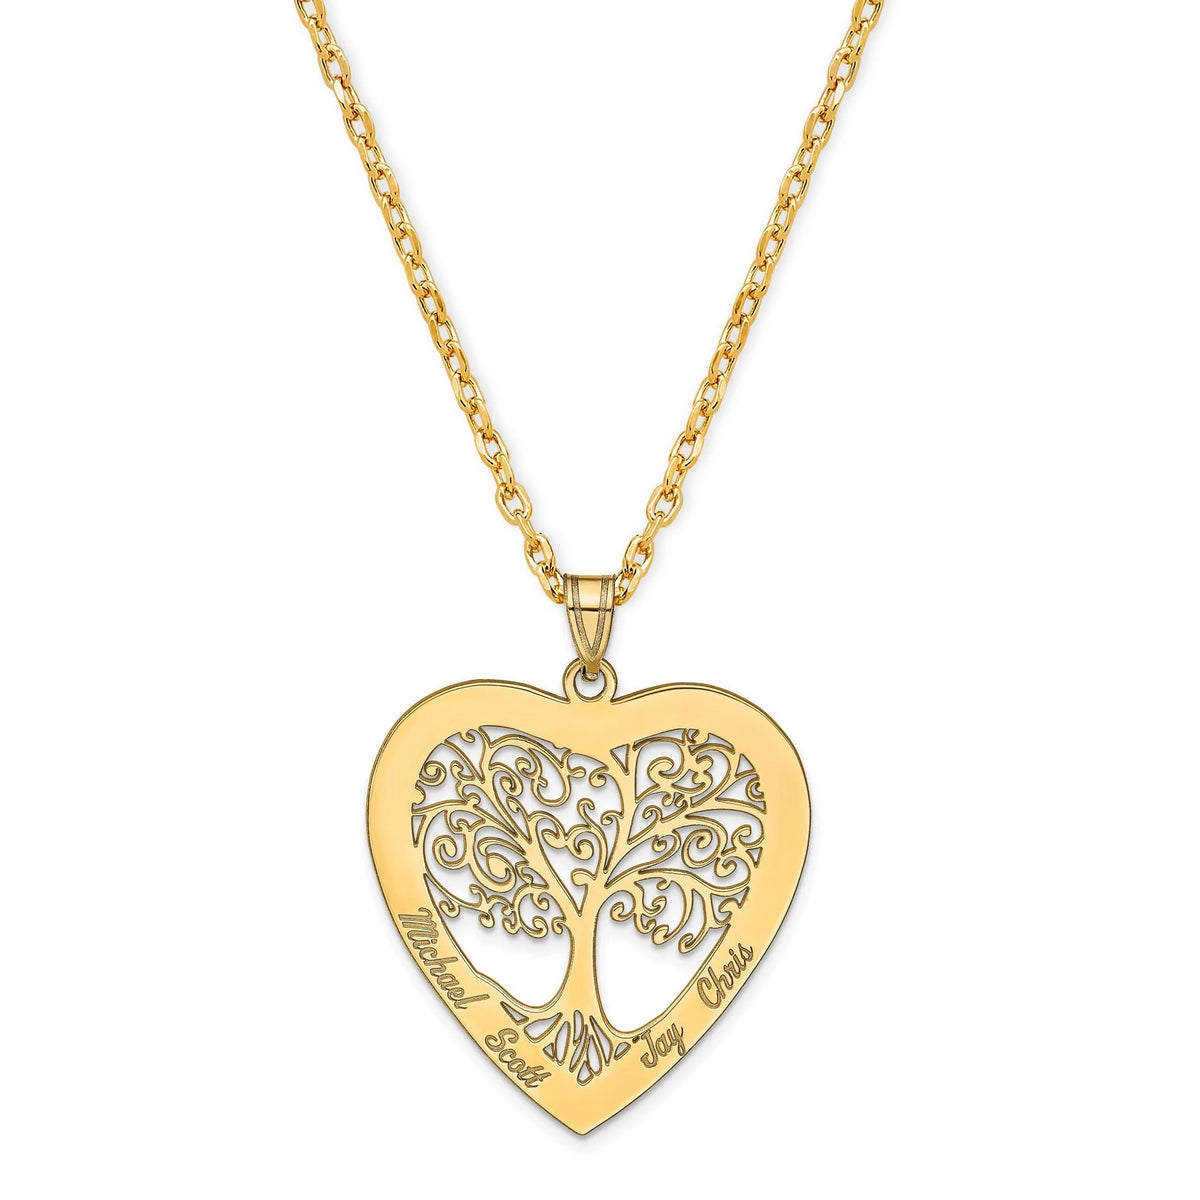 Personalized Heart Family Tree Pendant with Necklace Up to 4 Names w(MADE IN USA)10k Gold or Silver Gift Box Included